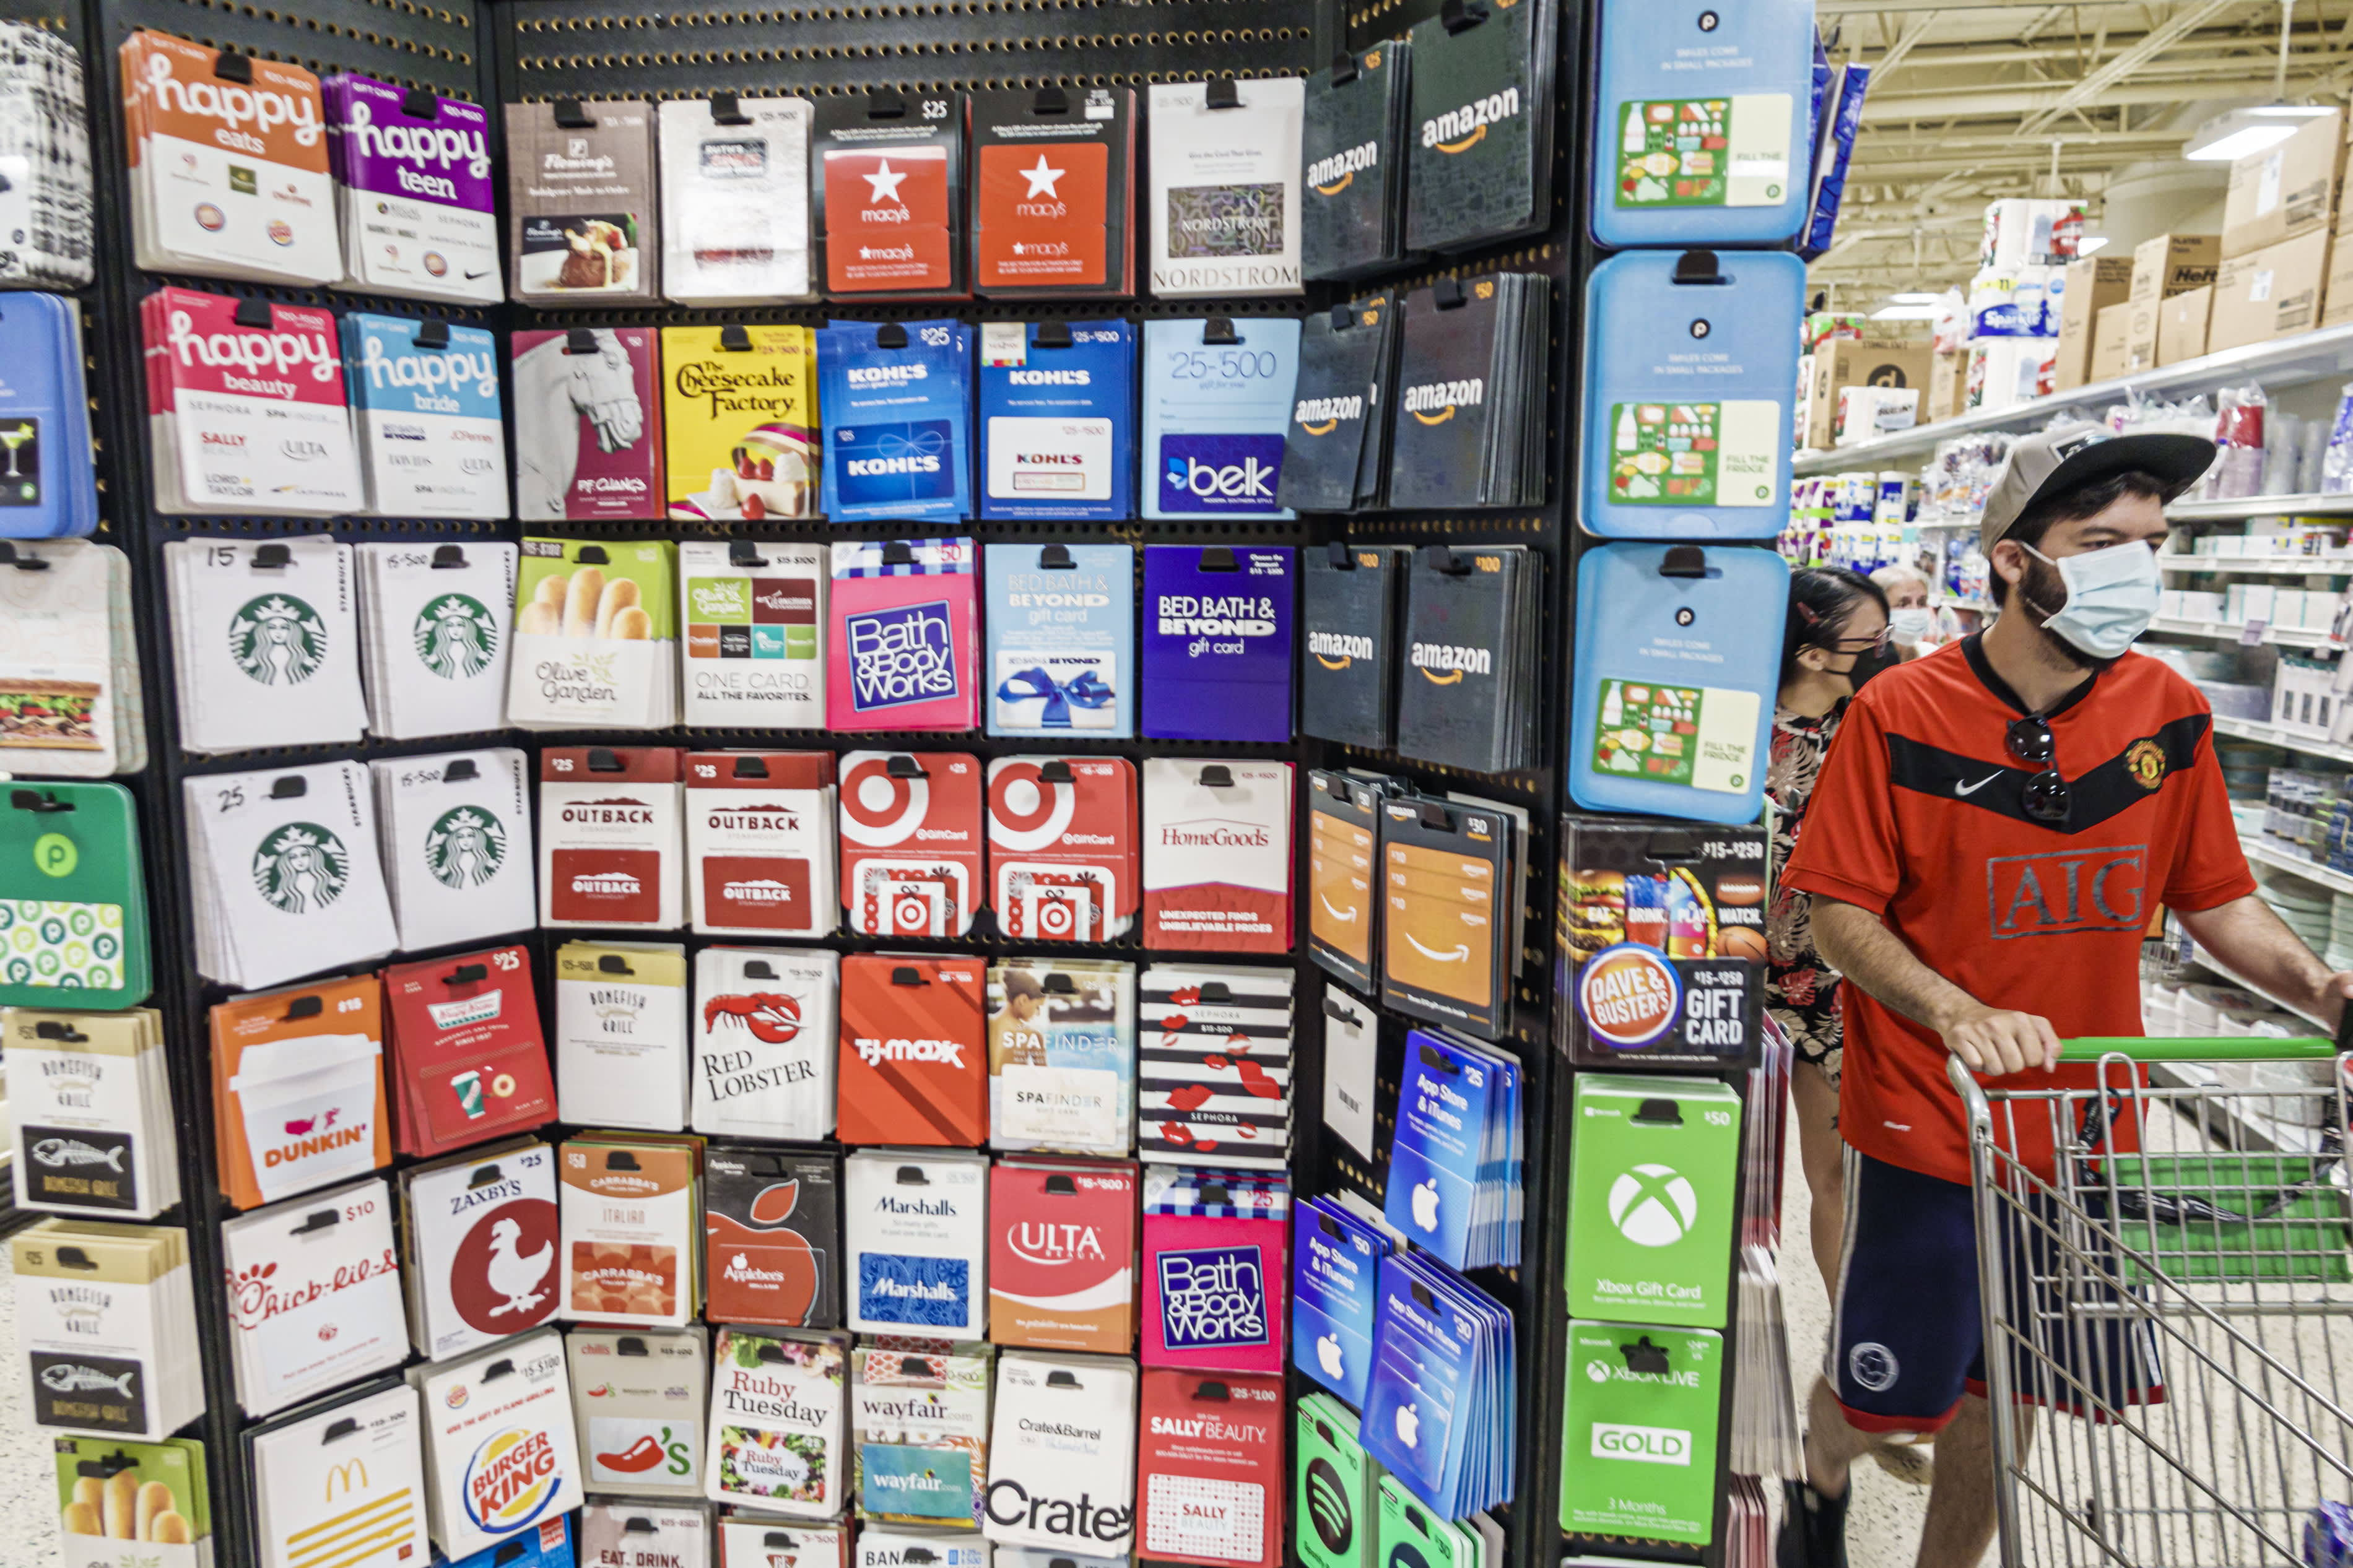 Buying Holiday Gift Cards Could Help Increase Retail Sales in 2021: Bill Simon